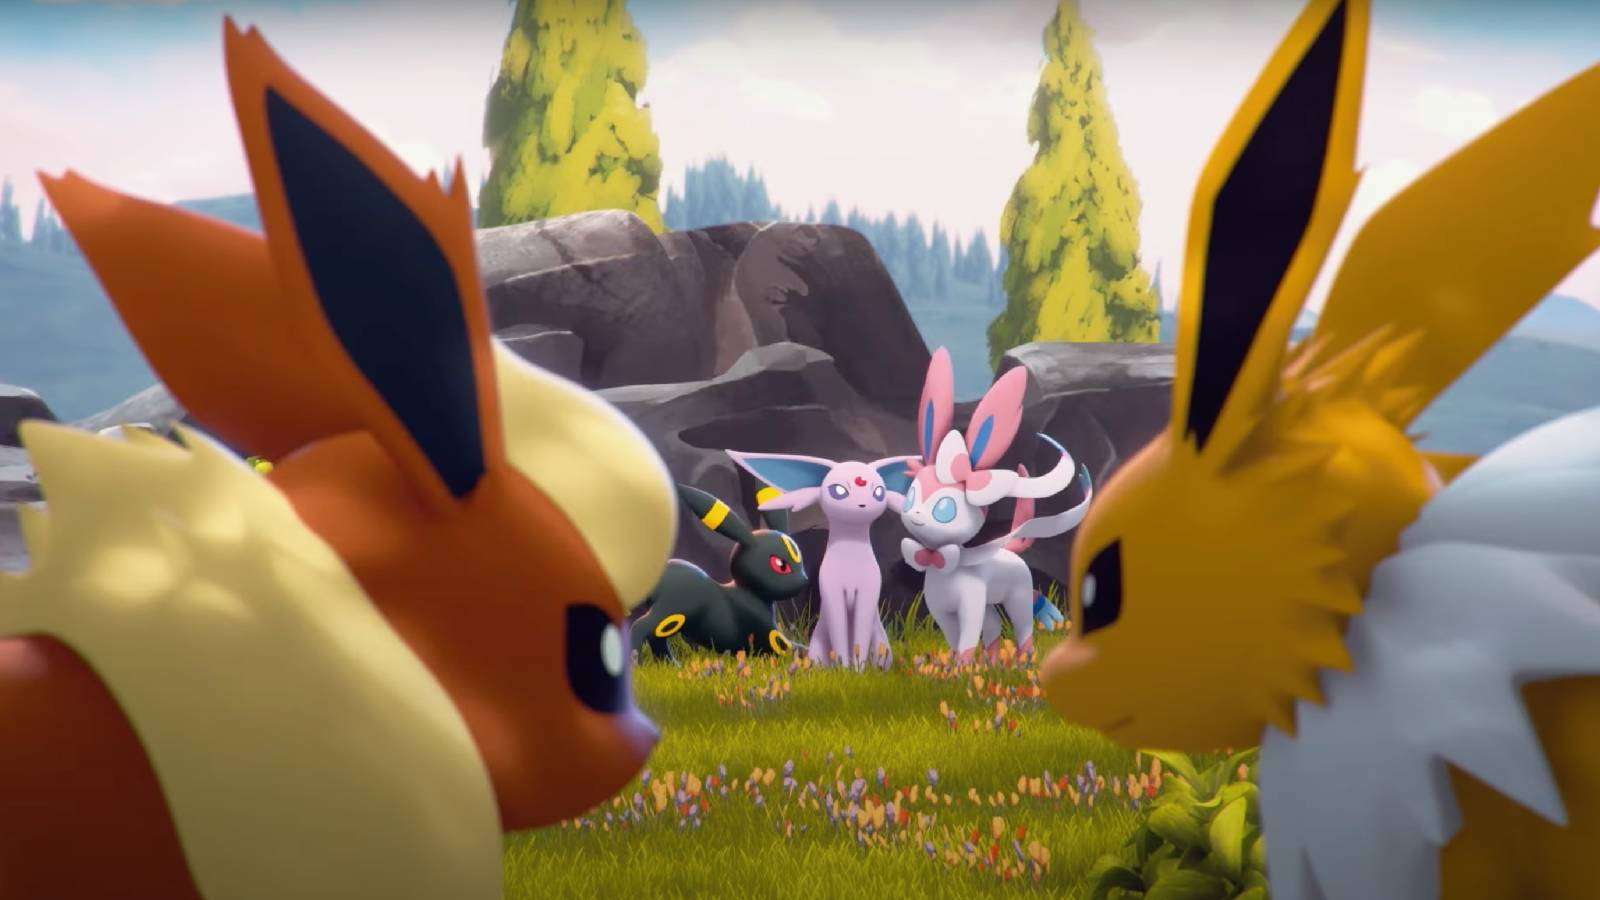 The Pokemon Jolteon and Flareon look at each other in the foreground, while Umbreon, Especon, and Sylveon play in the background